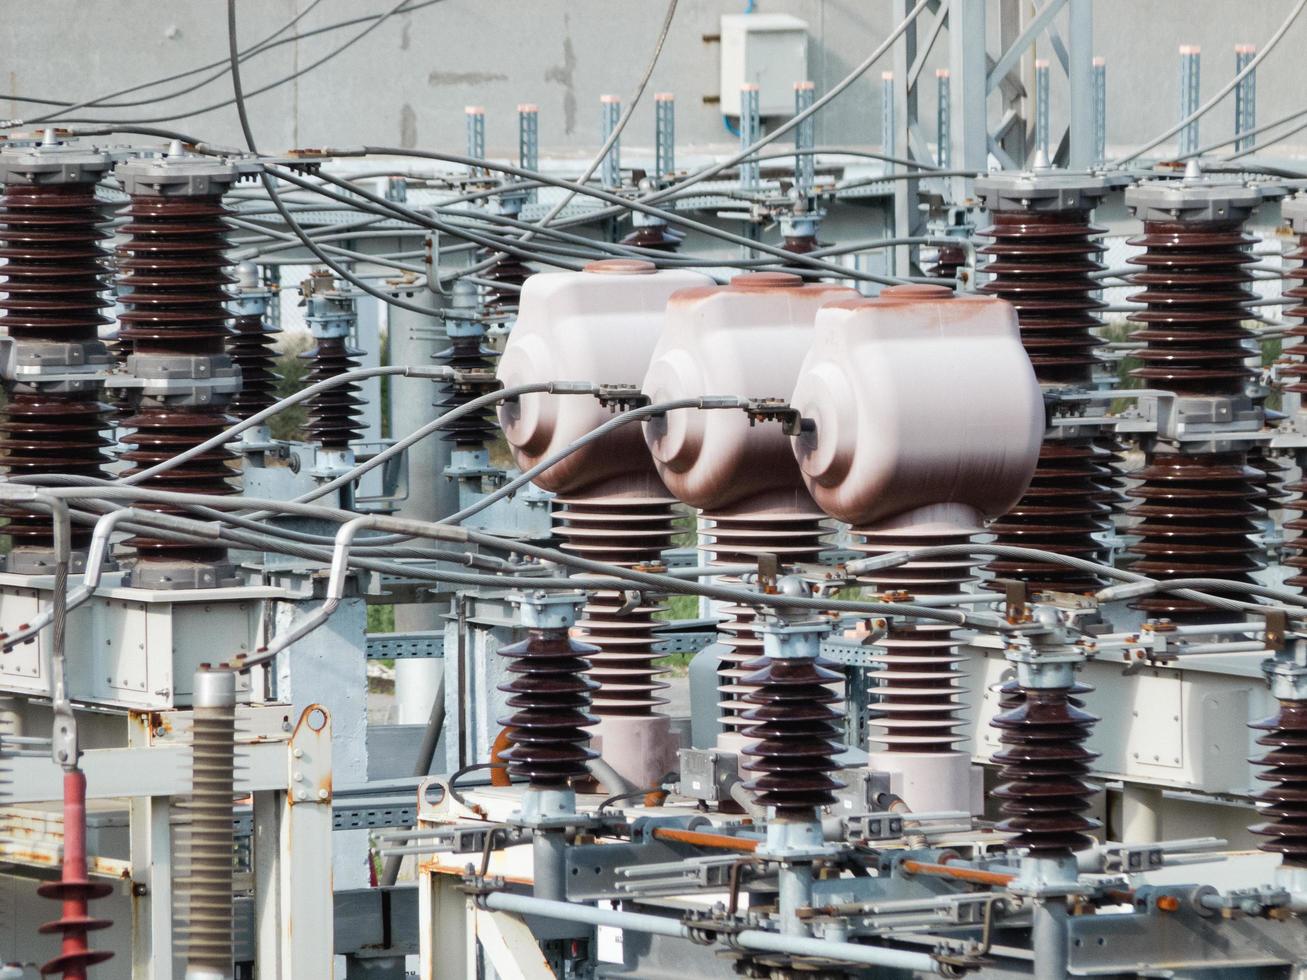 Measuring current transformers at a high-voltage city substation. photo